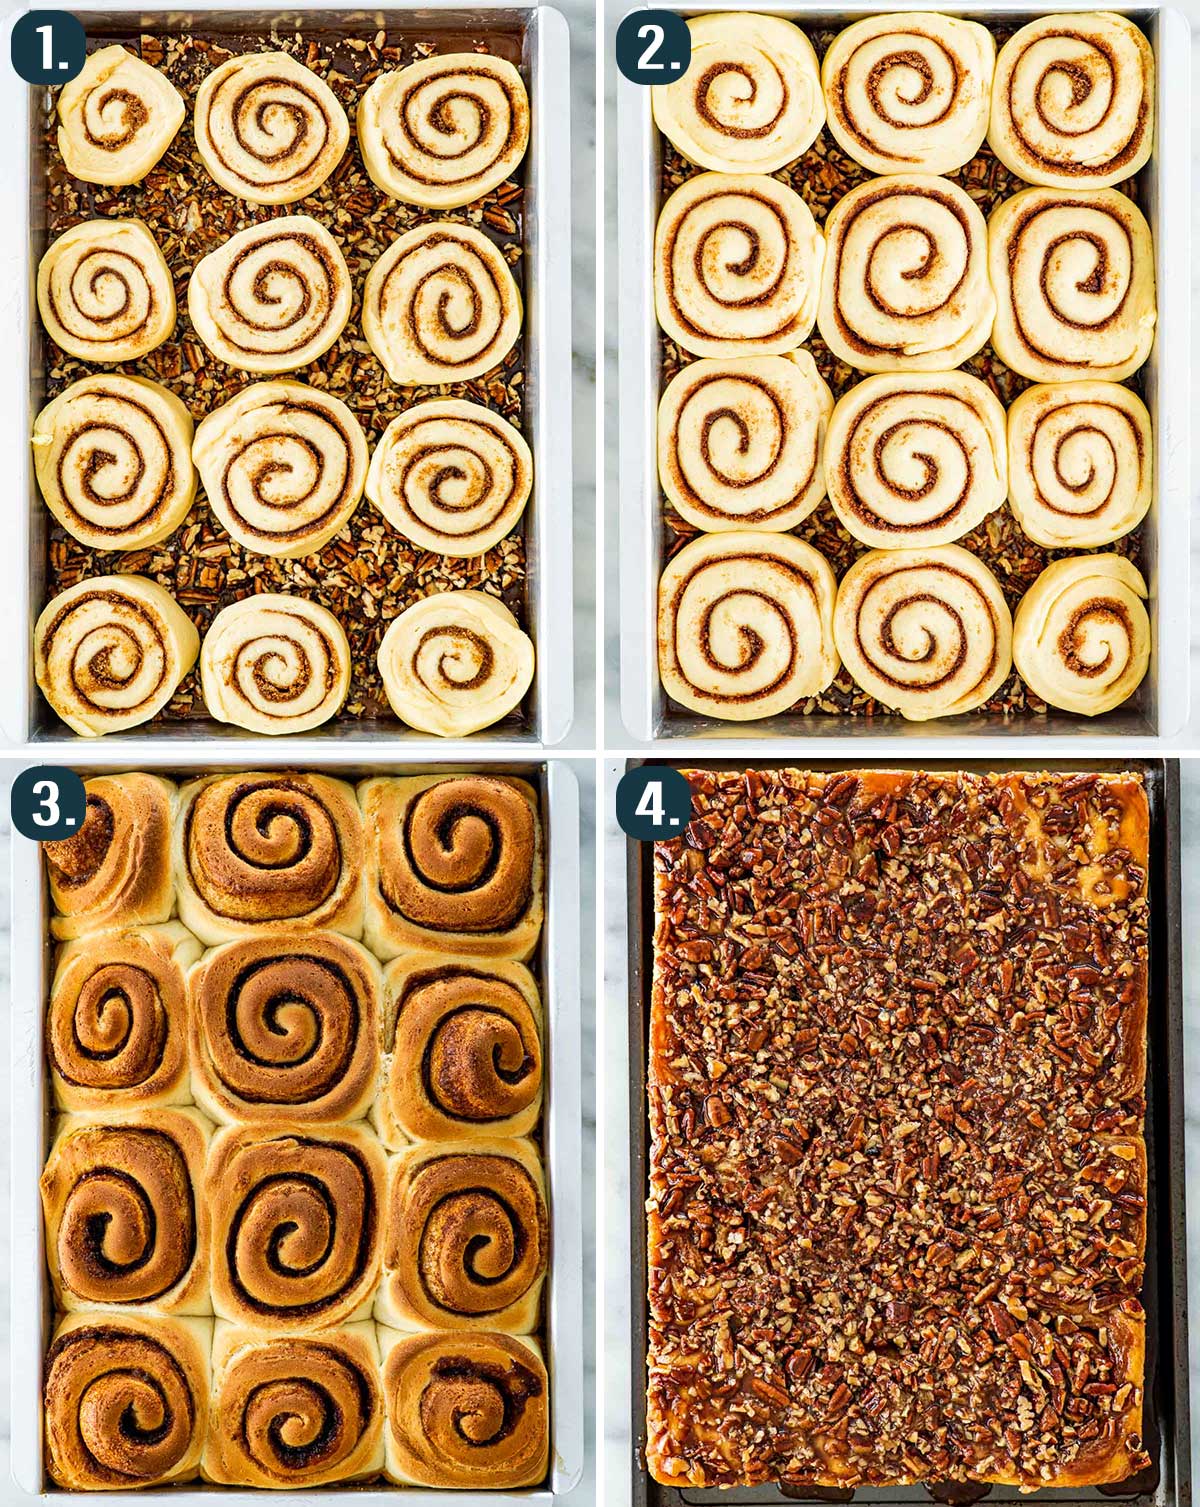 process shots showing sticky buns how to rise, bake and invert over.